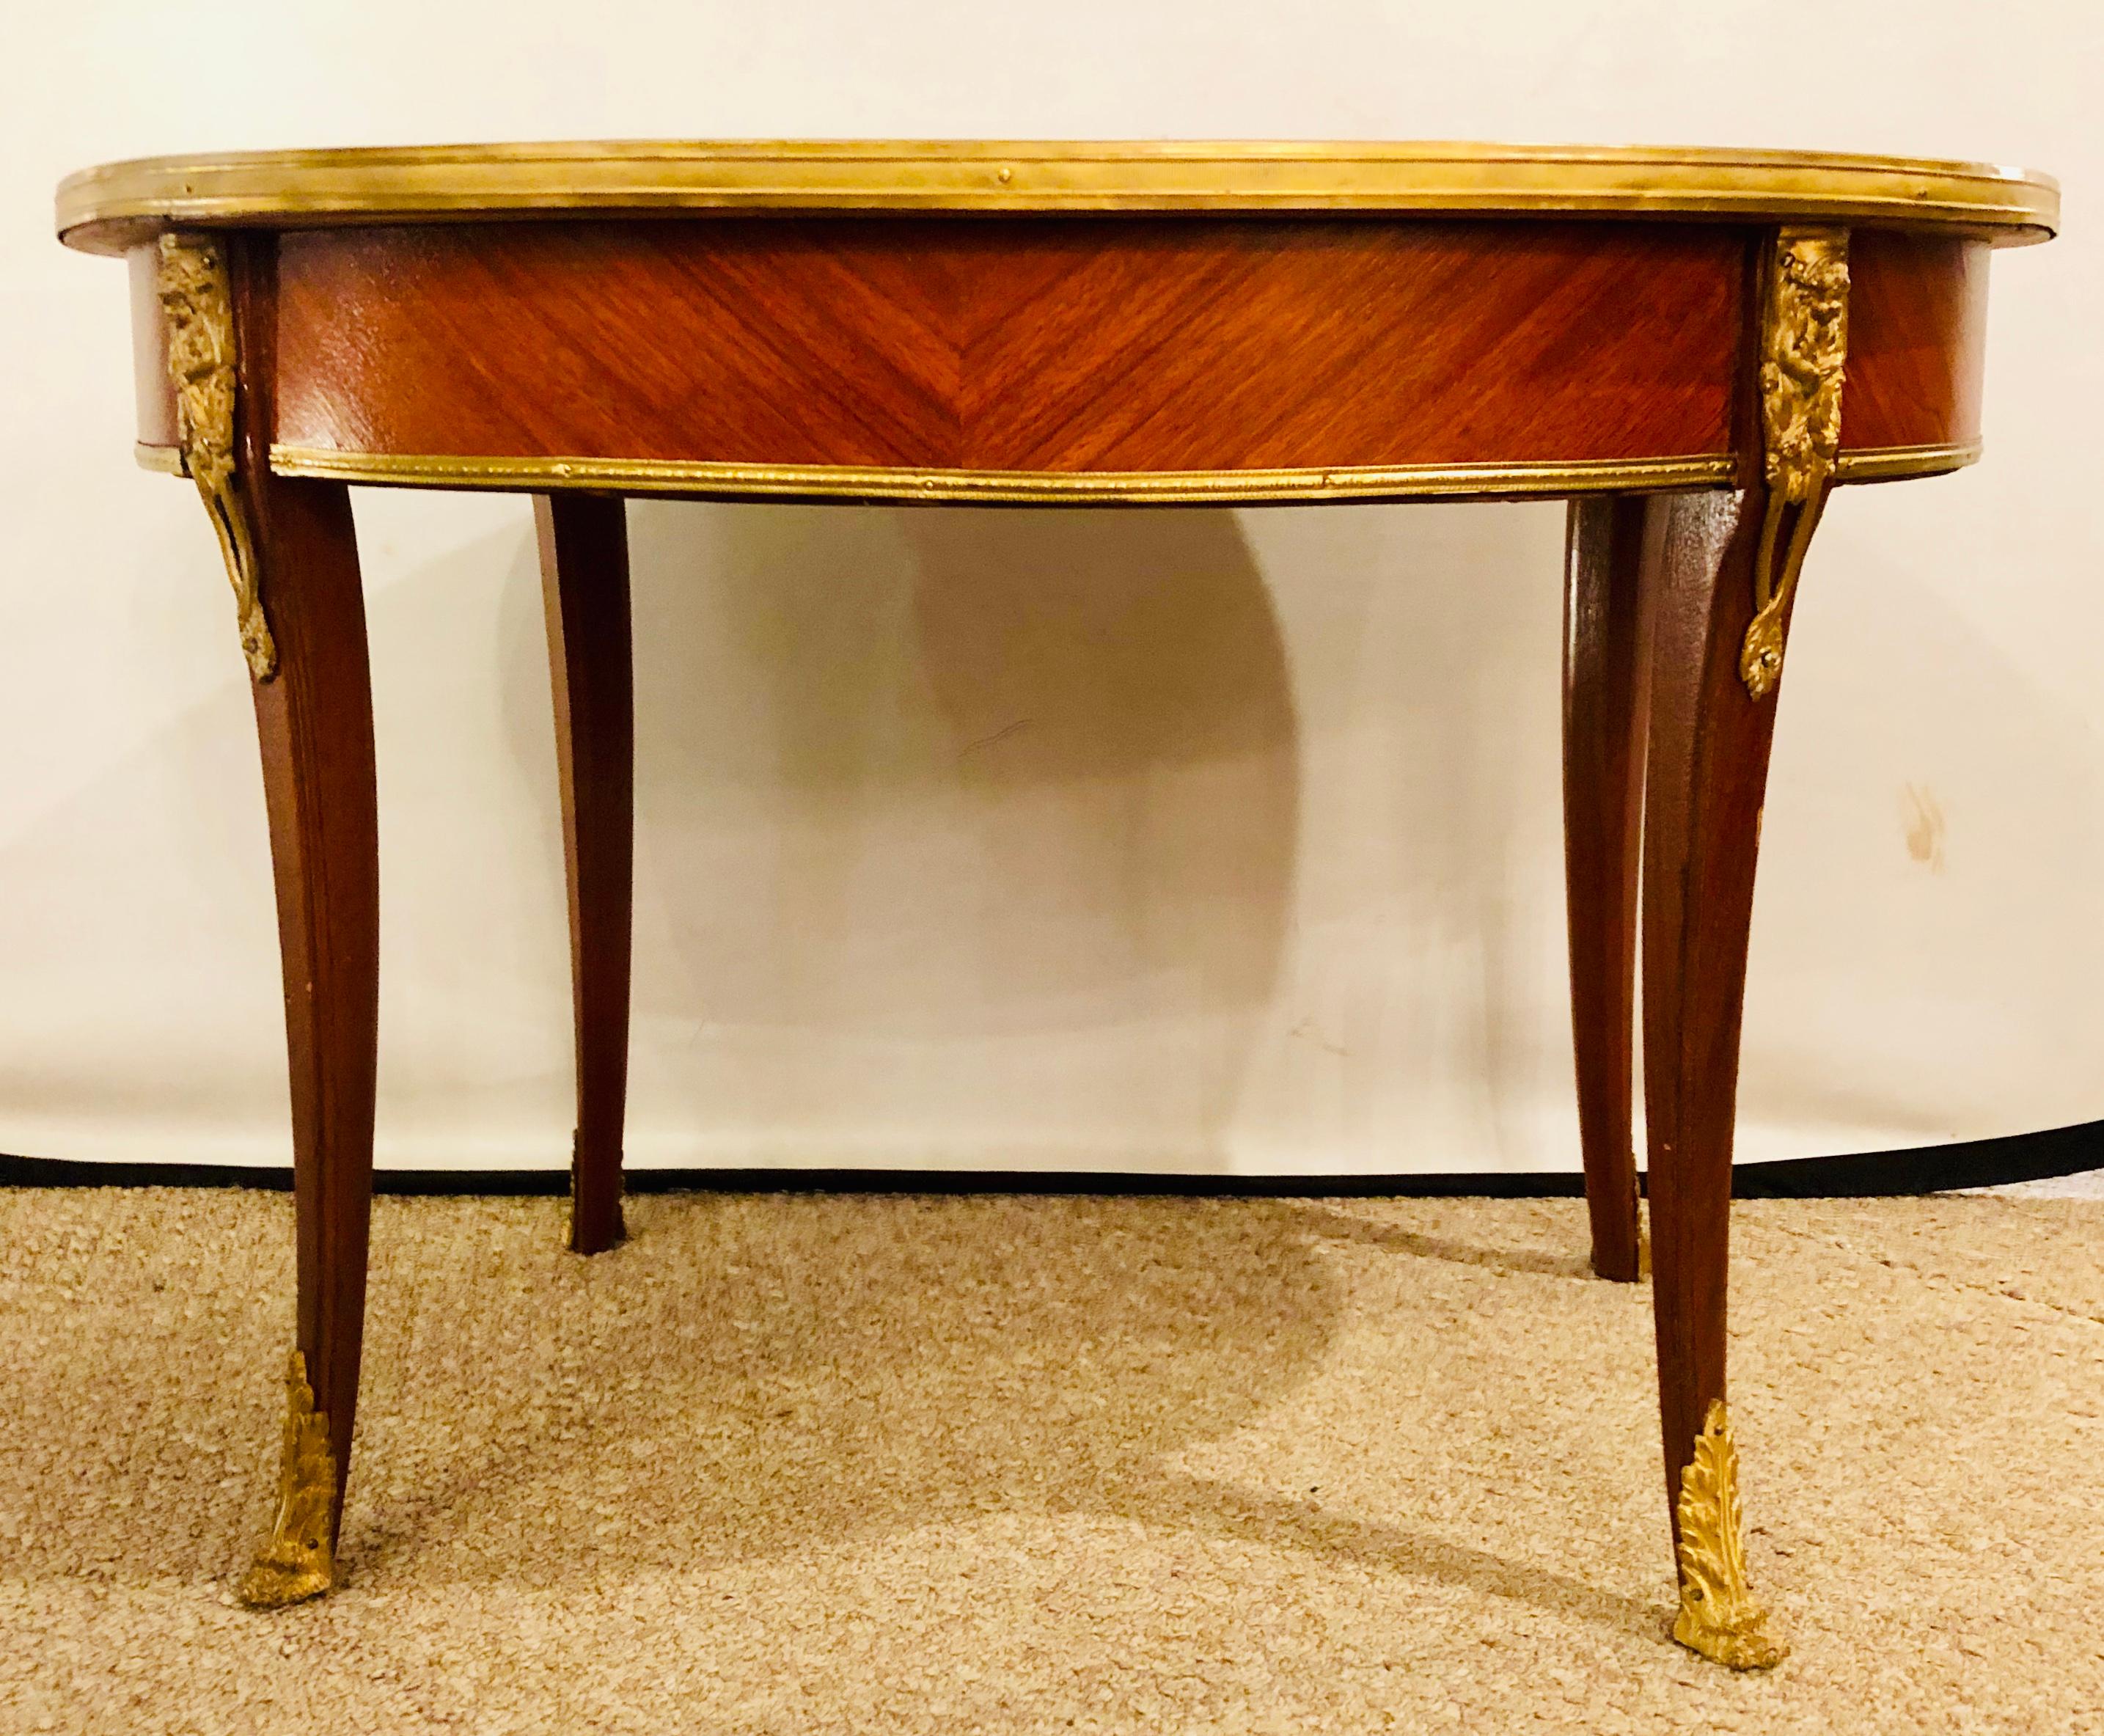 1920s Louis XVI style coffee or low table walnut and marble having an oval form with a bronze framed marble top on curved legs.


Lia.